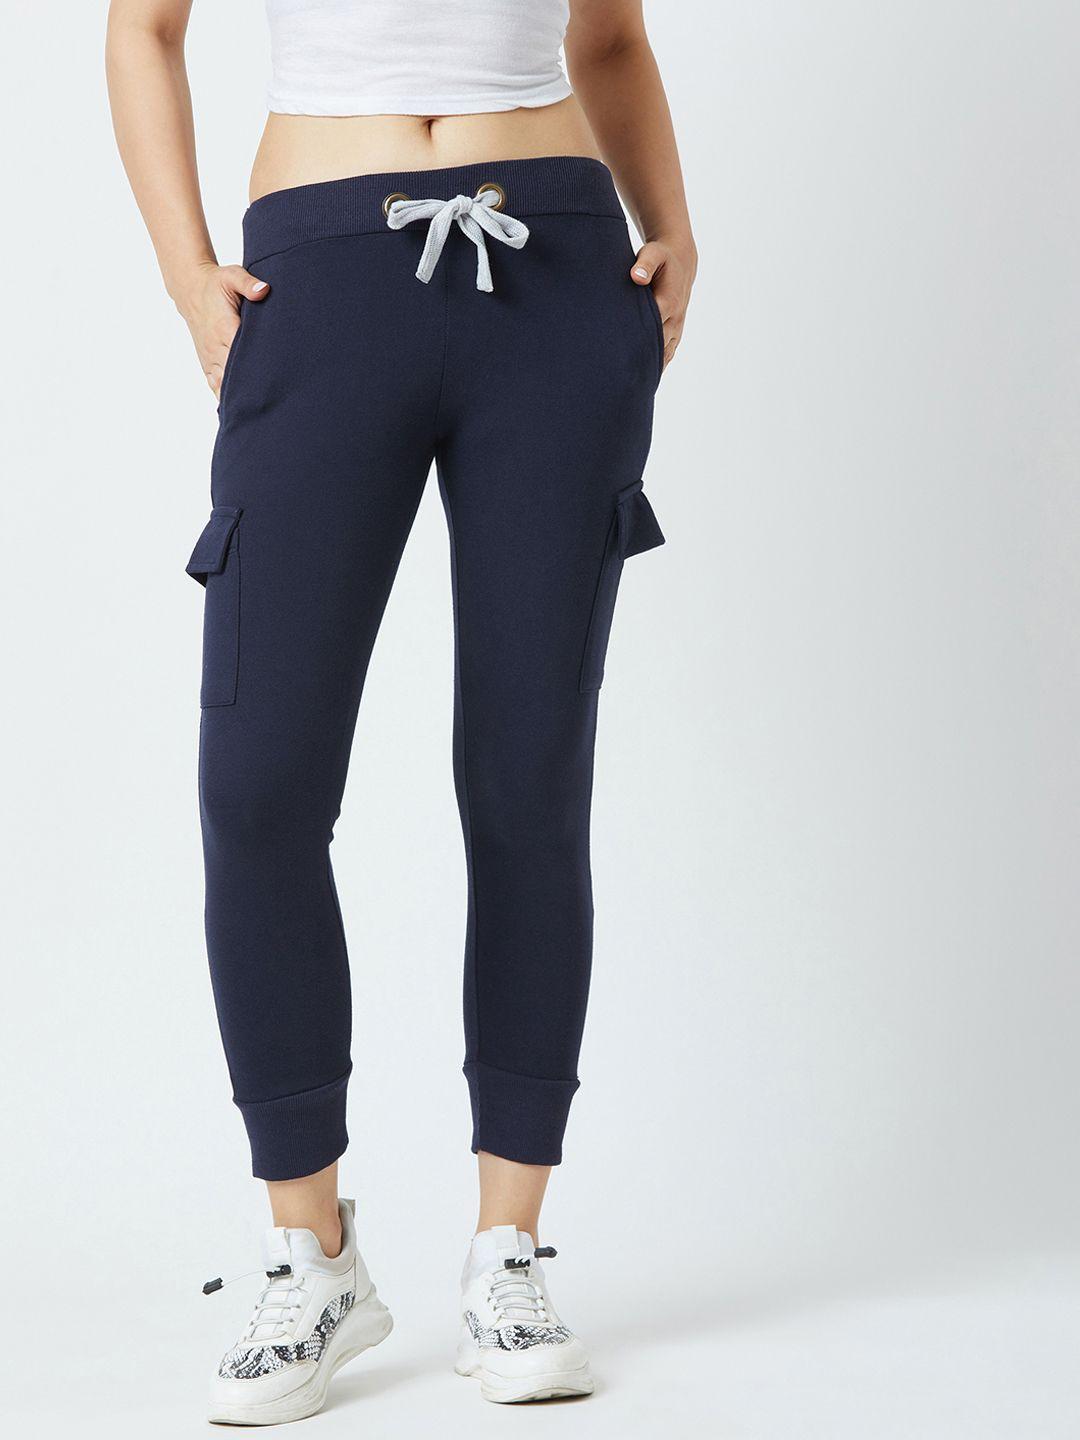 the-dry-state-women-navy-blue-solid-slim-fit-joggers